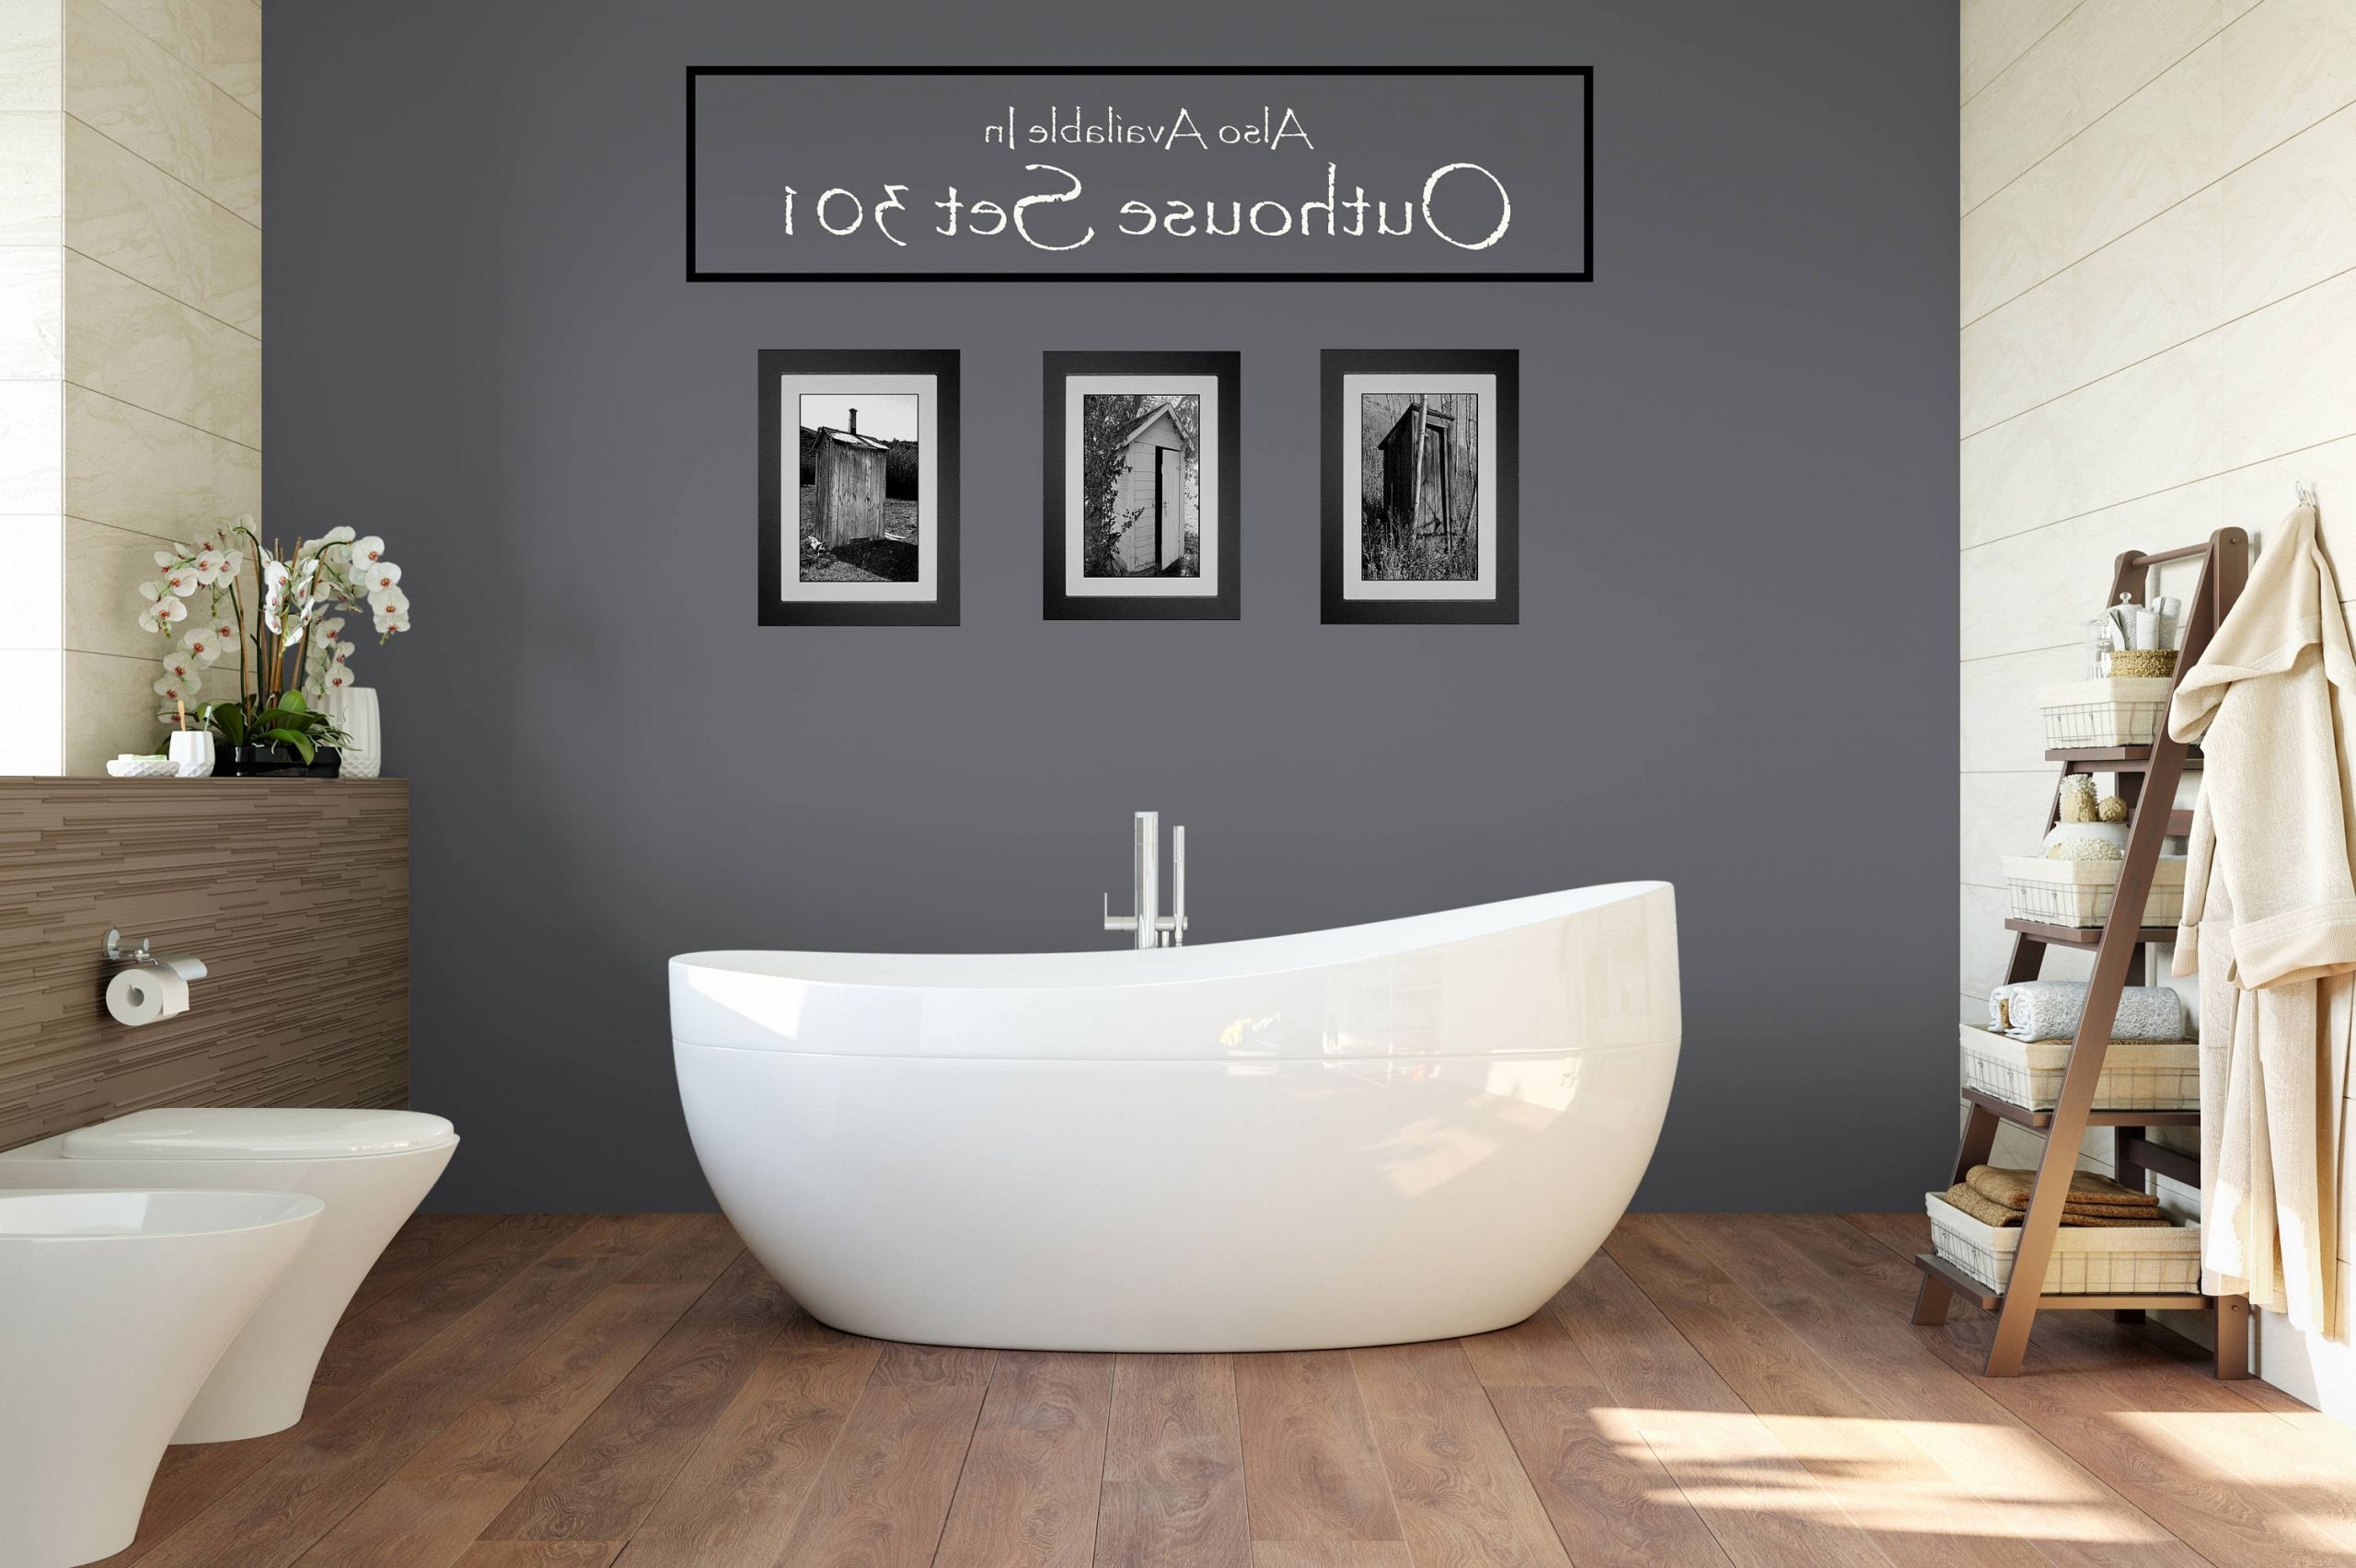 Pictures Suitable For Bathroom Walls
 2020 Popular Red Bathroom Wall Art